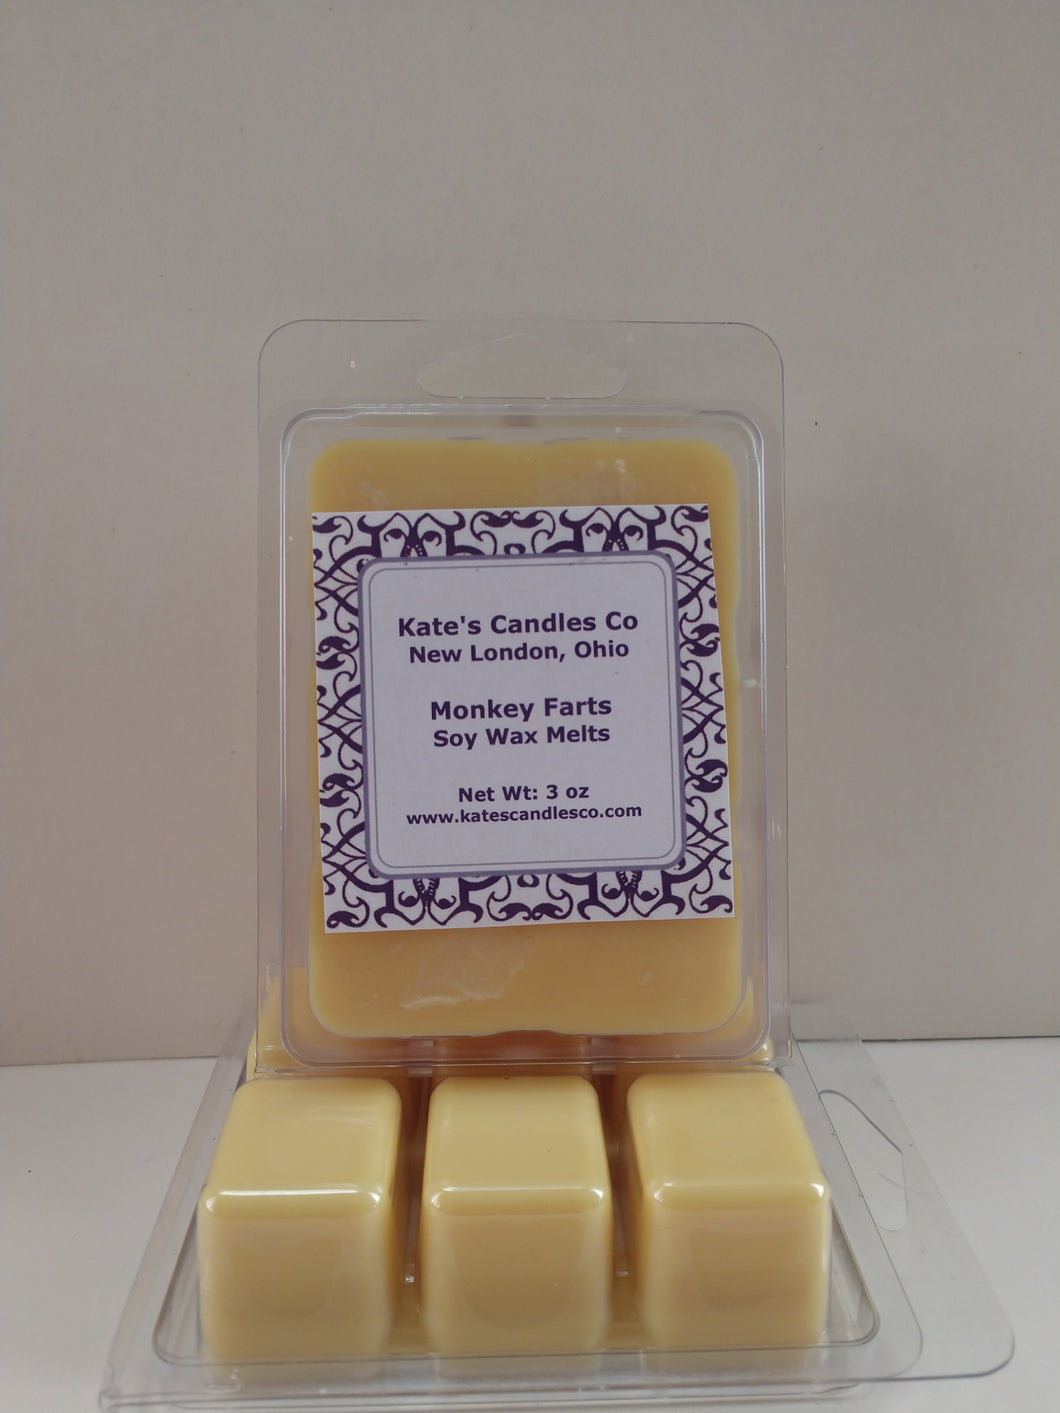 Monkey Farts Soy Wax Melts - Kate's Candles Co. Soy Candles